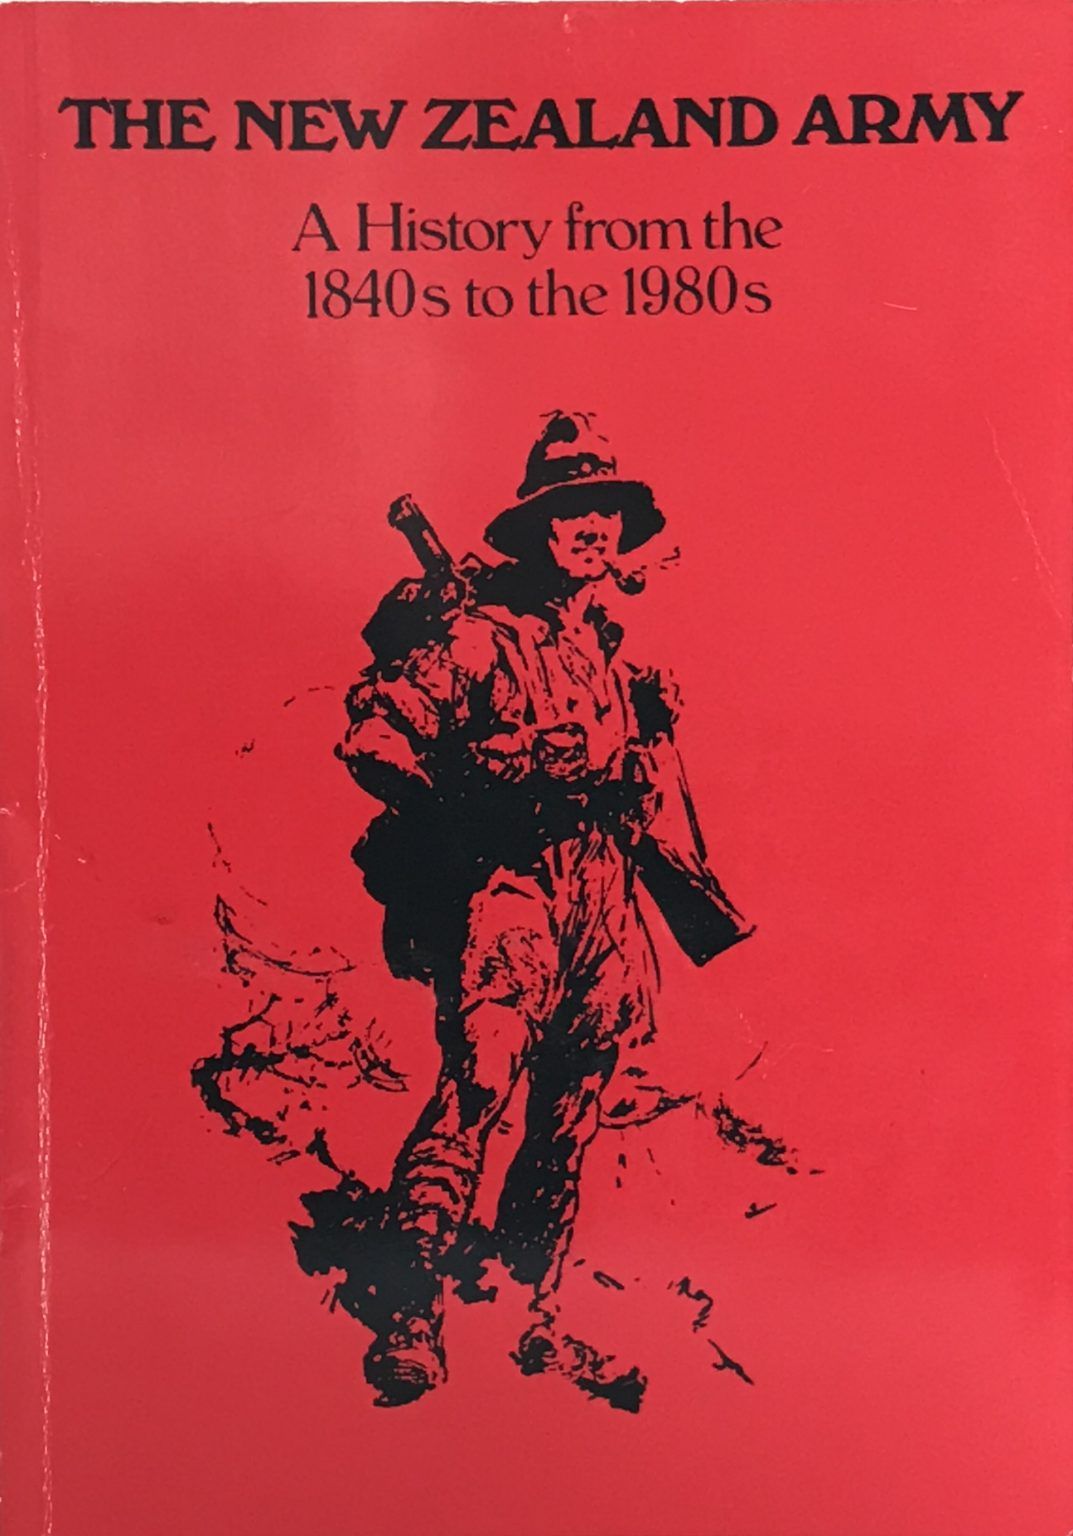 THE NEW ZEALAND ARMY: A History from the 1840s to the 1980s